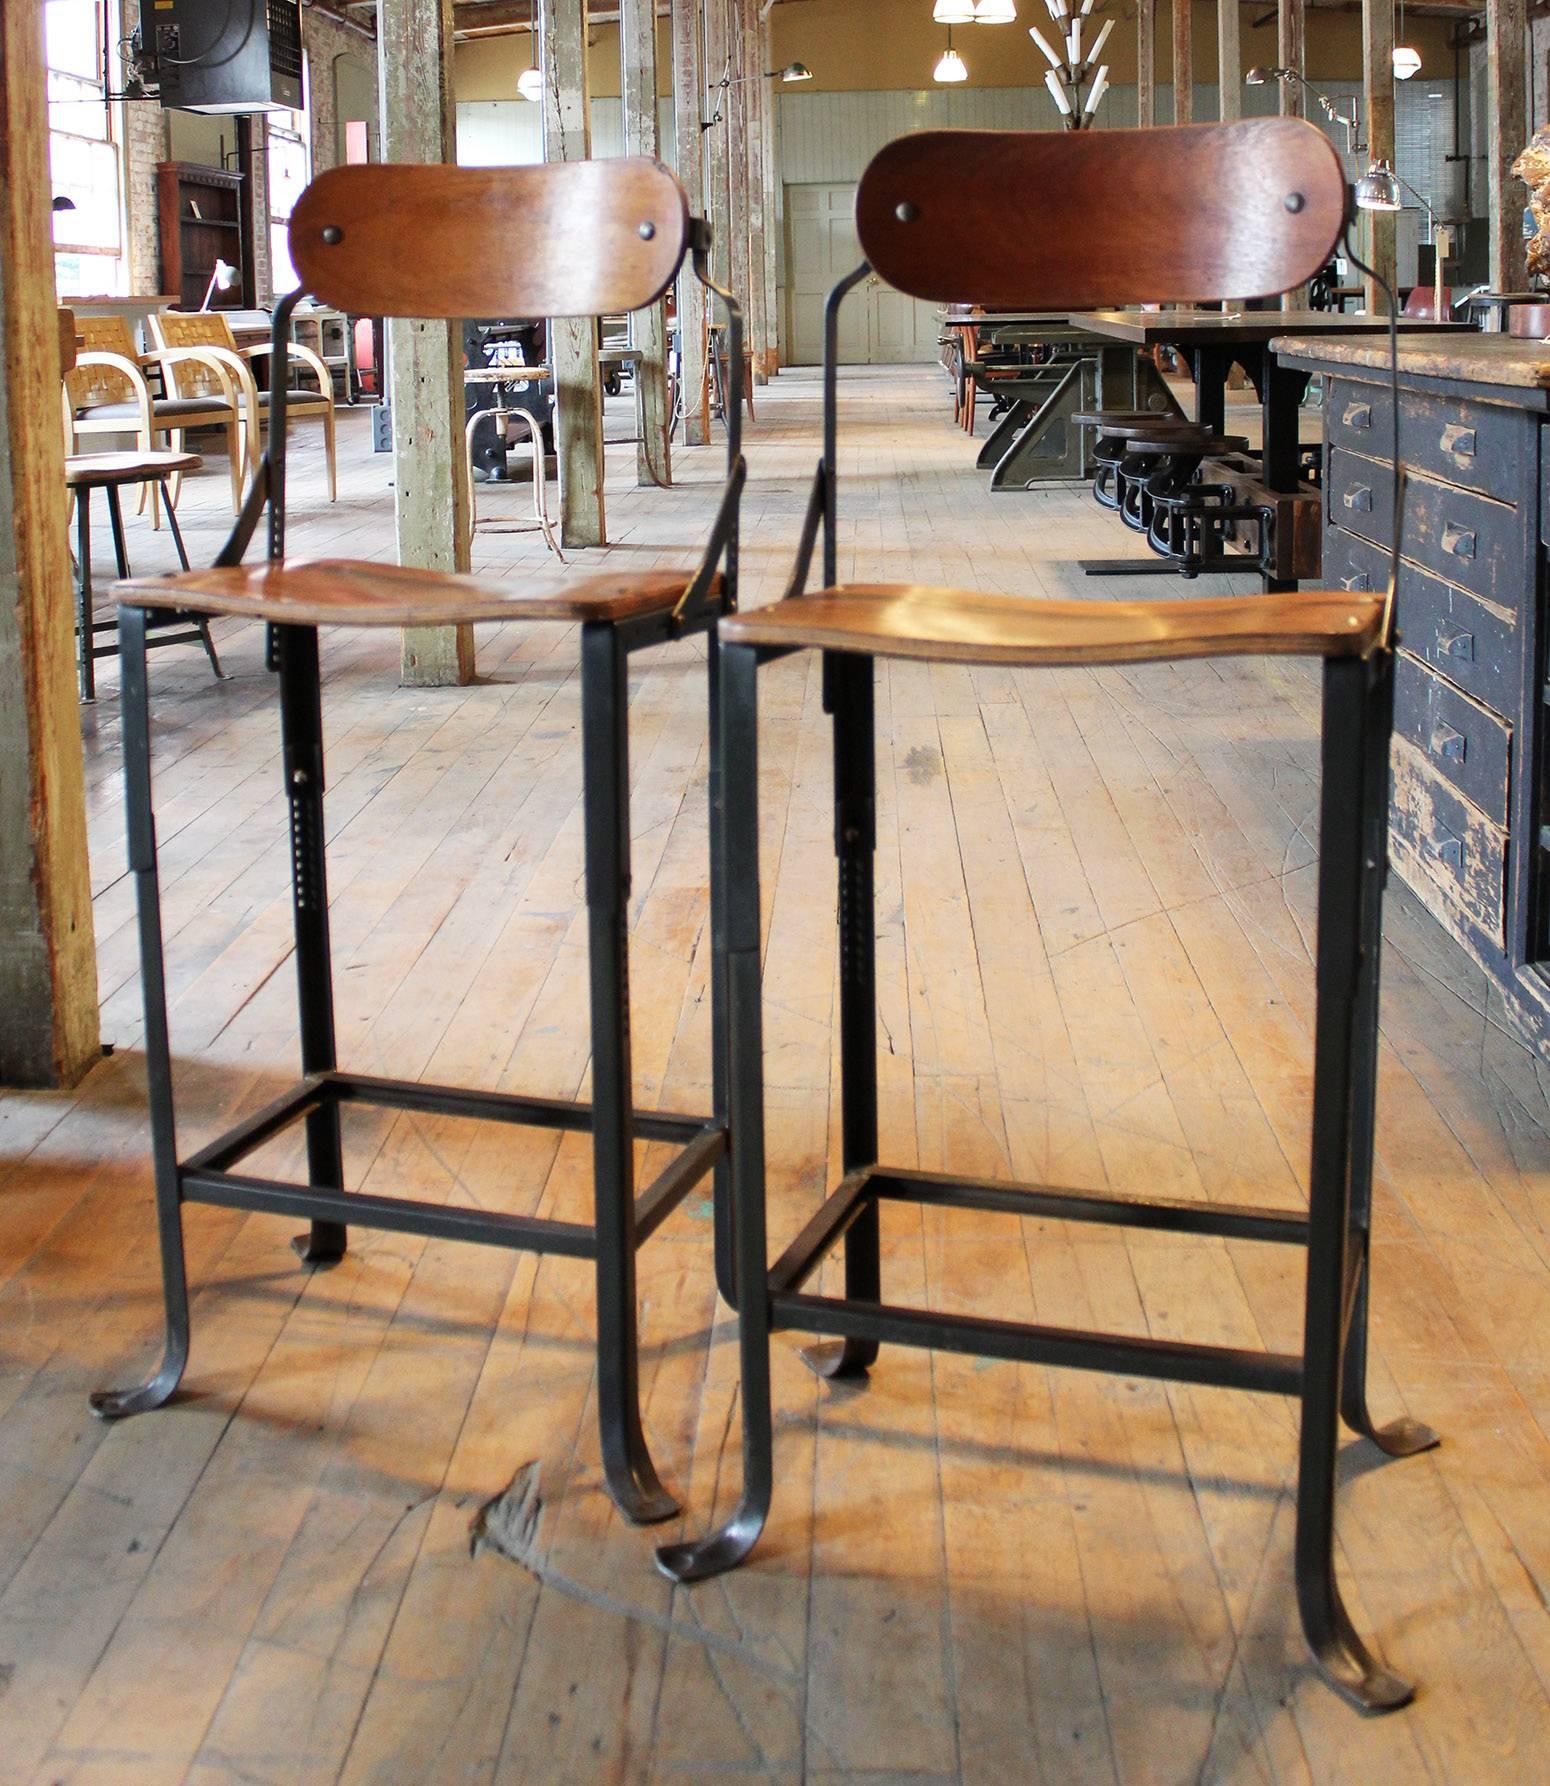 Pair of vintage Industrial DoMore metal and wood adjustable bar, counter, kitchen island stools. Bent plywood seat and backs, metal frames that adjust the height and chair back. Seat height is adjustable from 20 3/4" to 25 1/4". Seat